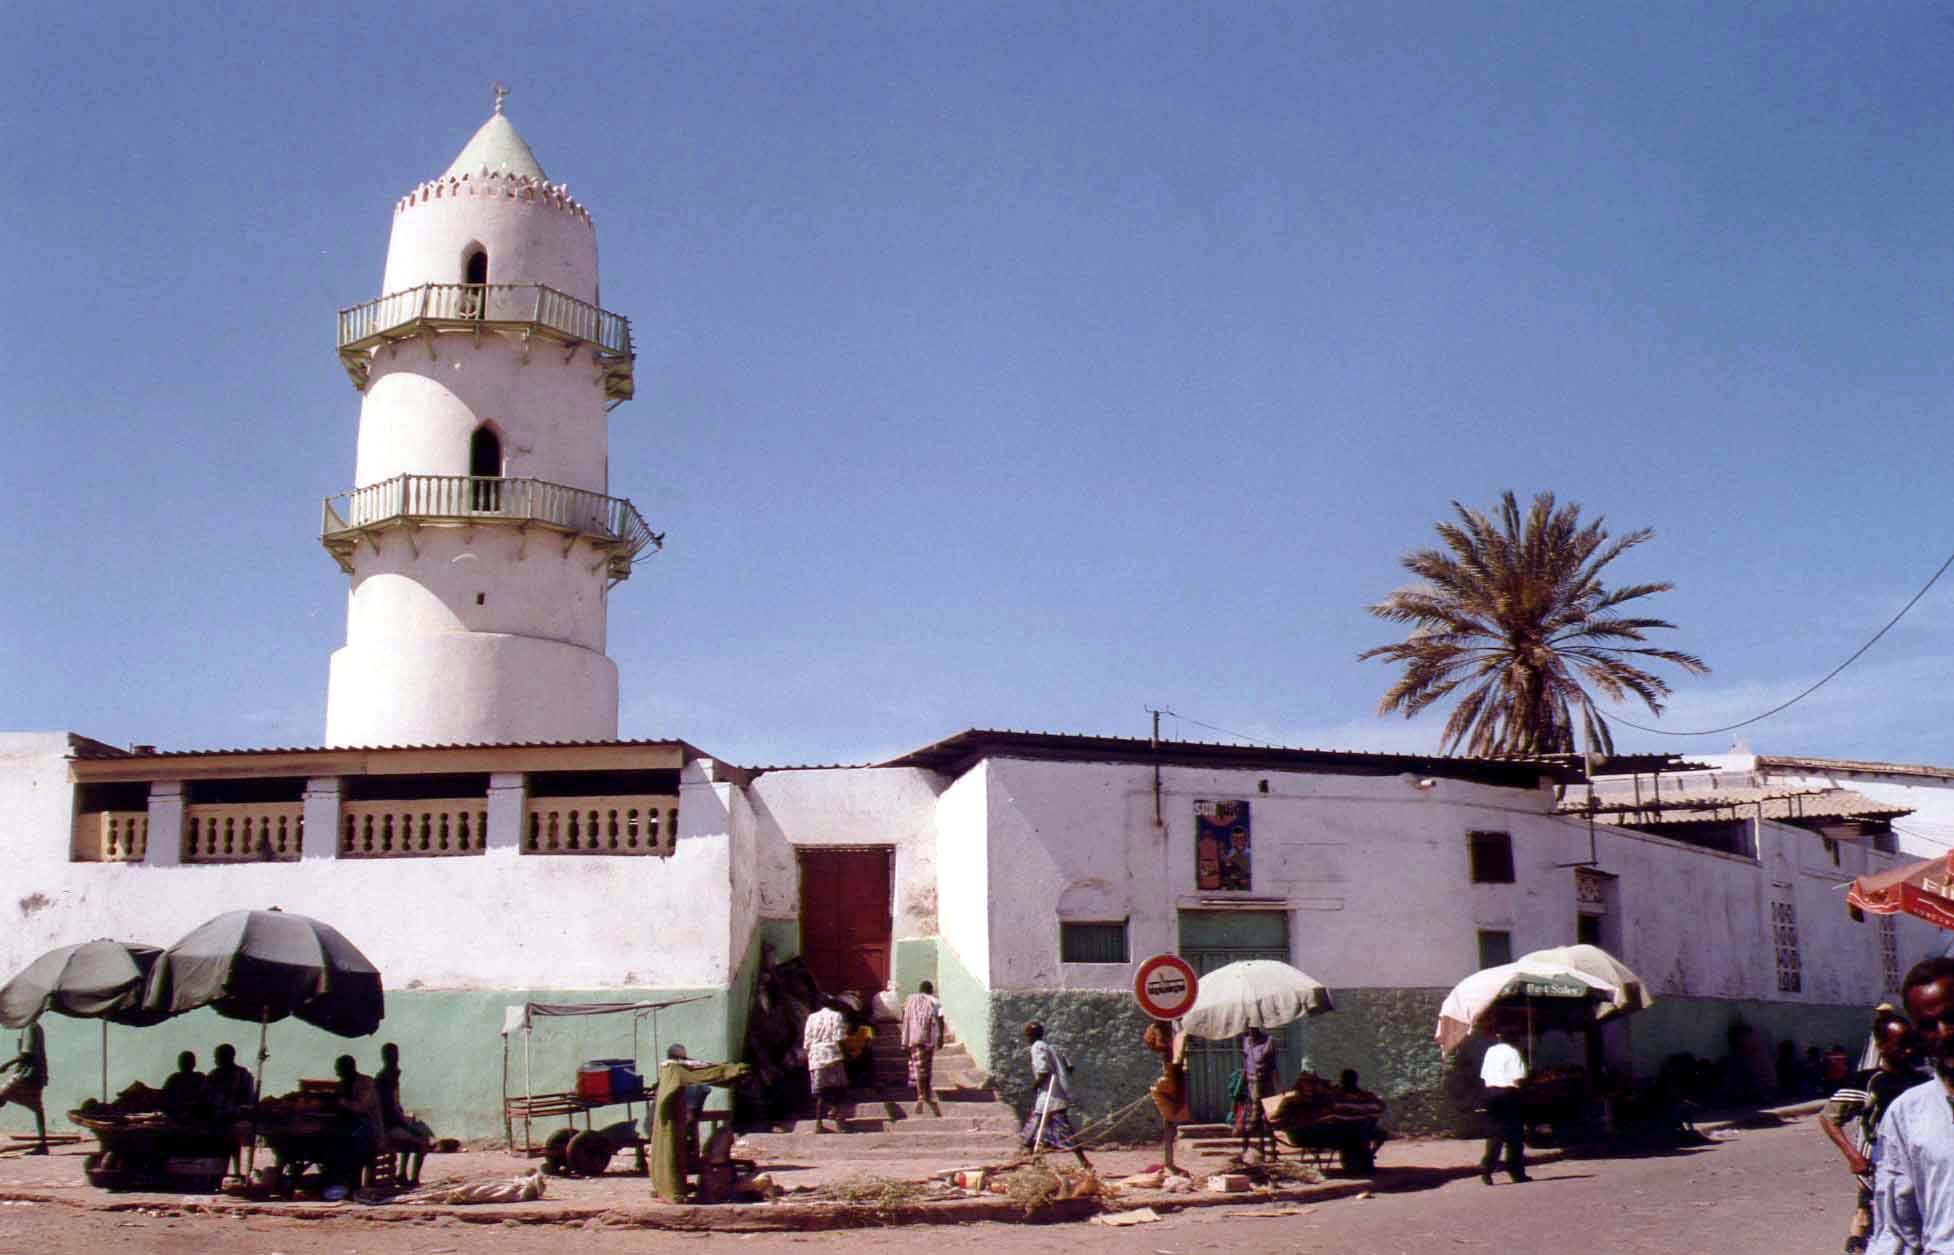 Djibouti City Pictures Photo Gallery Of Djibouti City High Quality